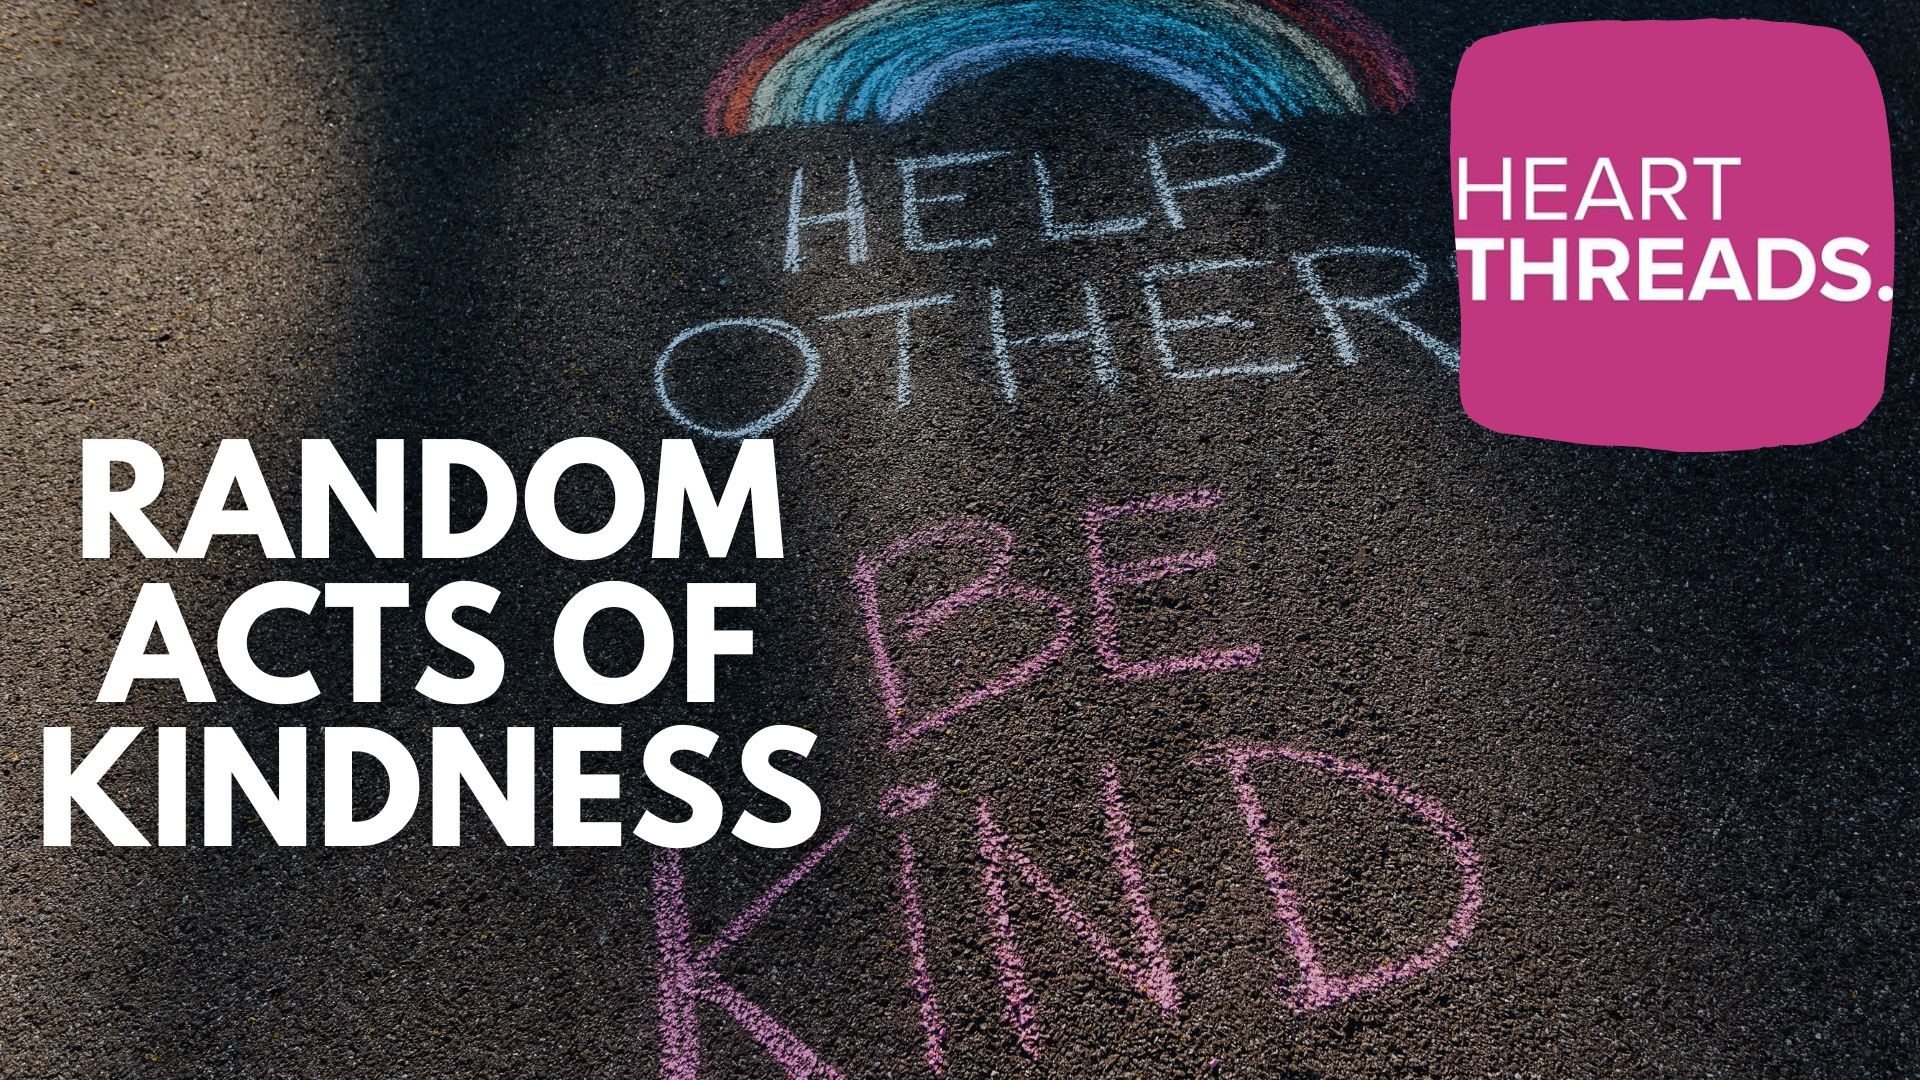 Feb. 17 marks random act of kindness day. This collection of stories focuses on the kindness of strangers and the random acts making people's days.